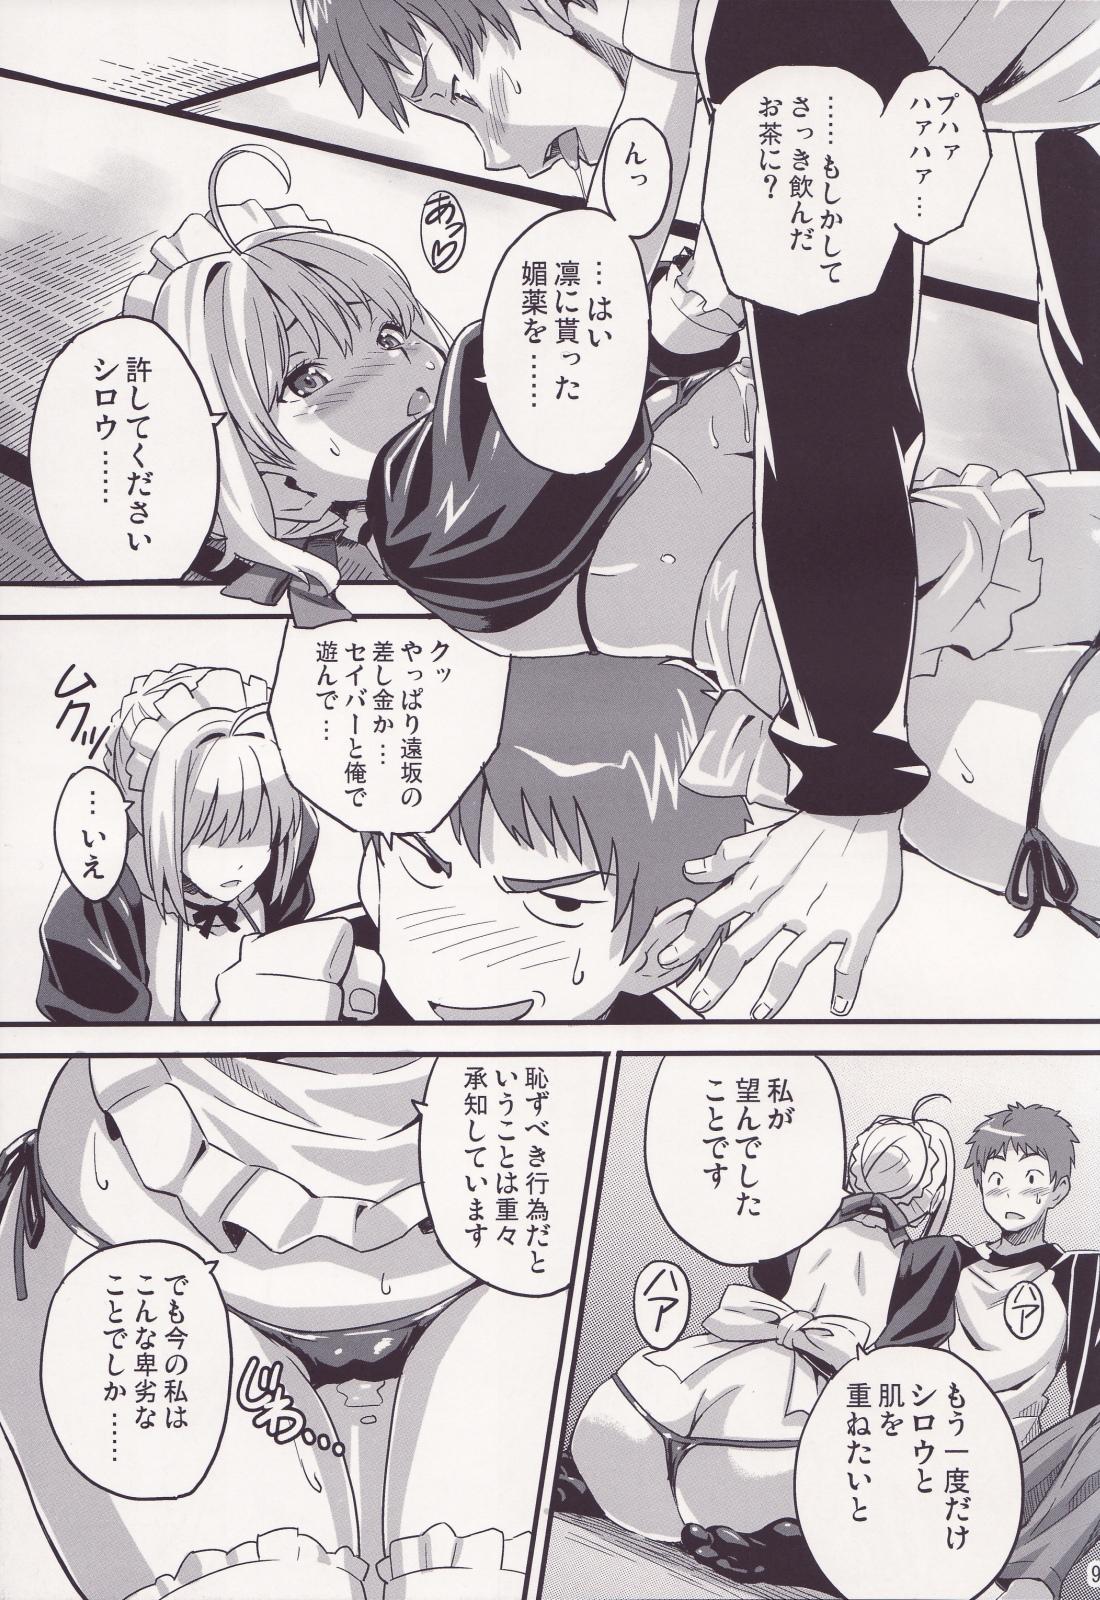 Celebrity Sex Scene Outama King of Soul - Fate stay night Sixtynine - Page 8